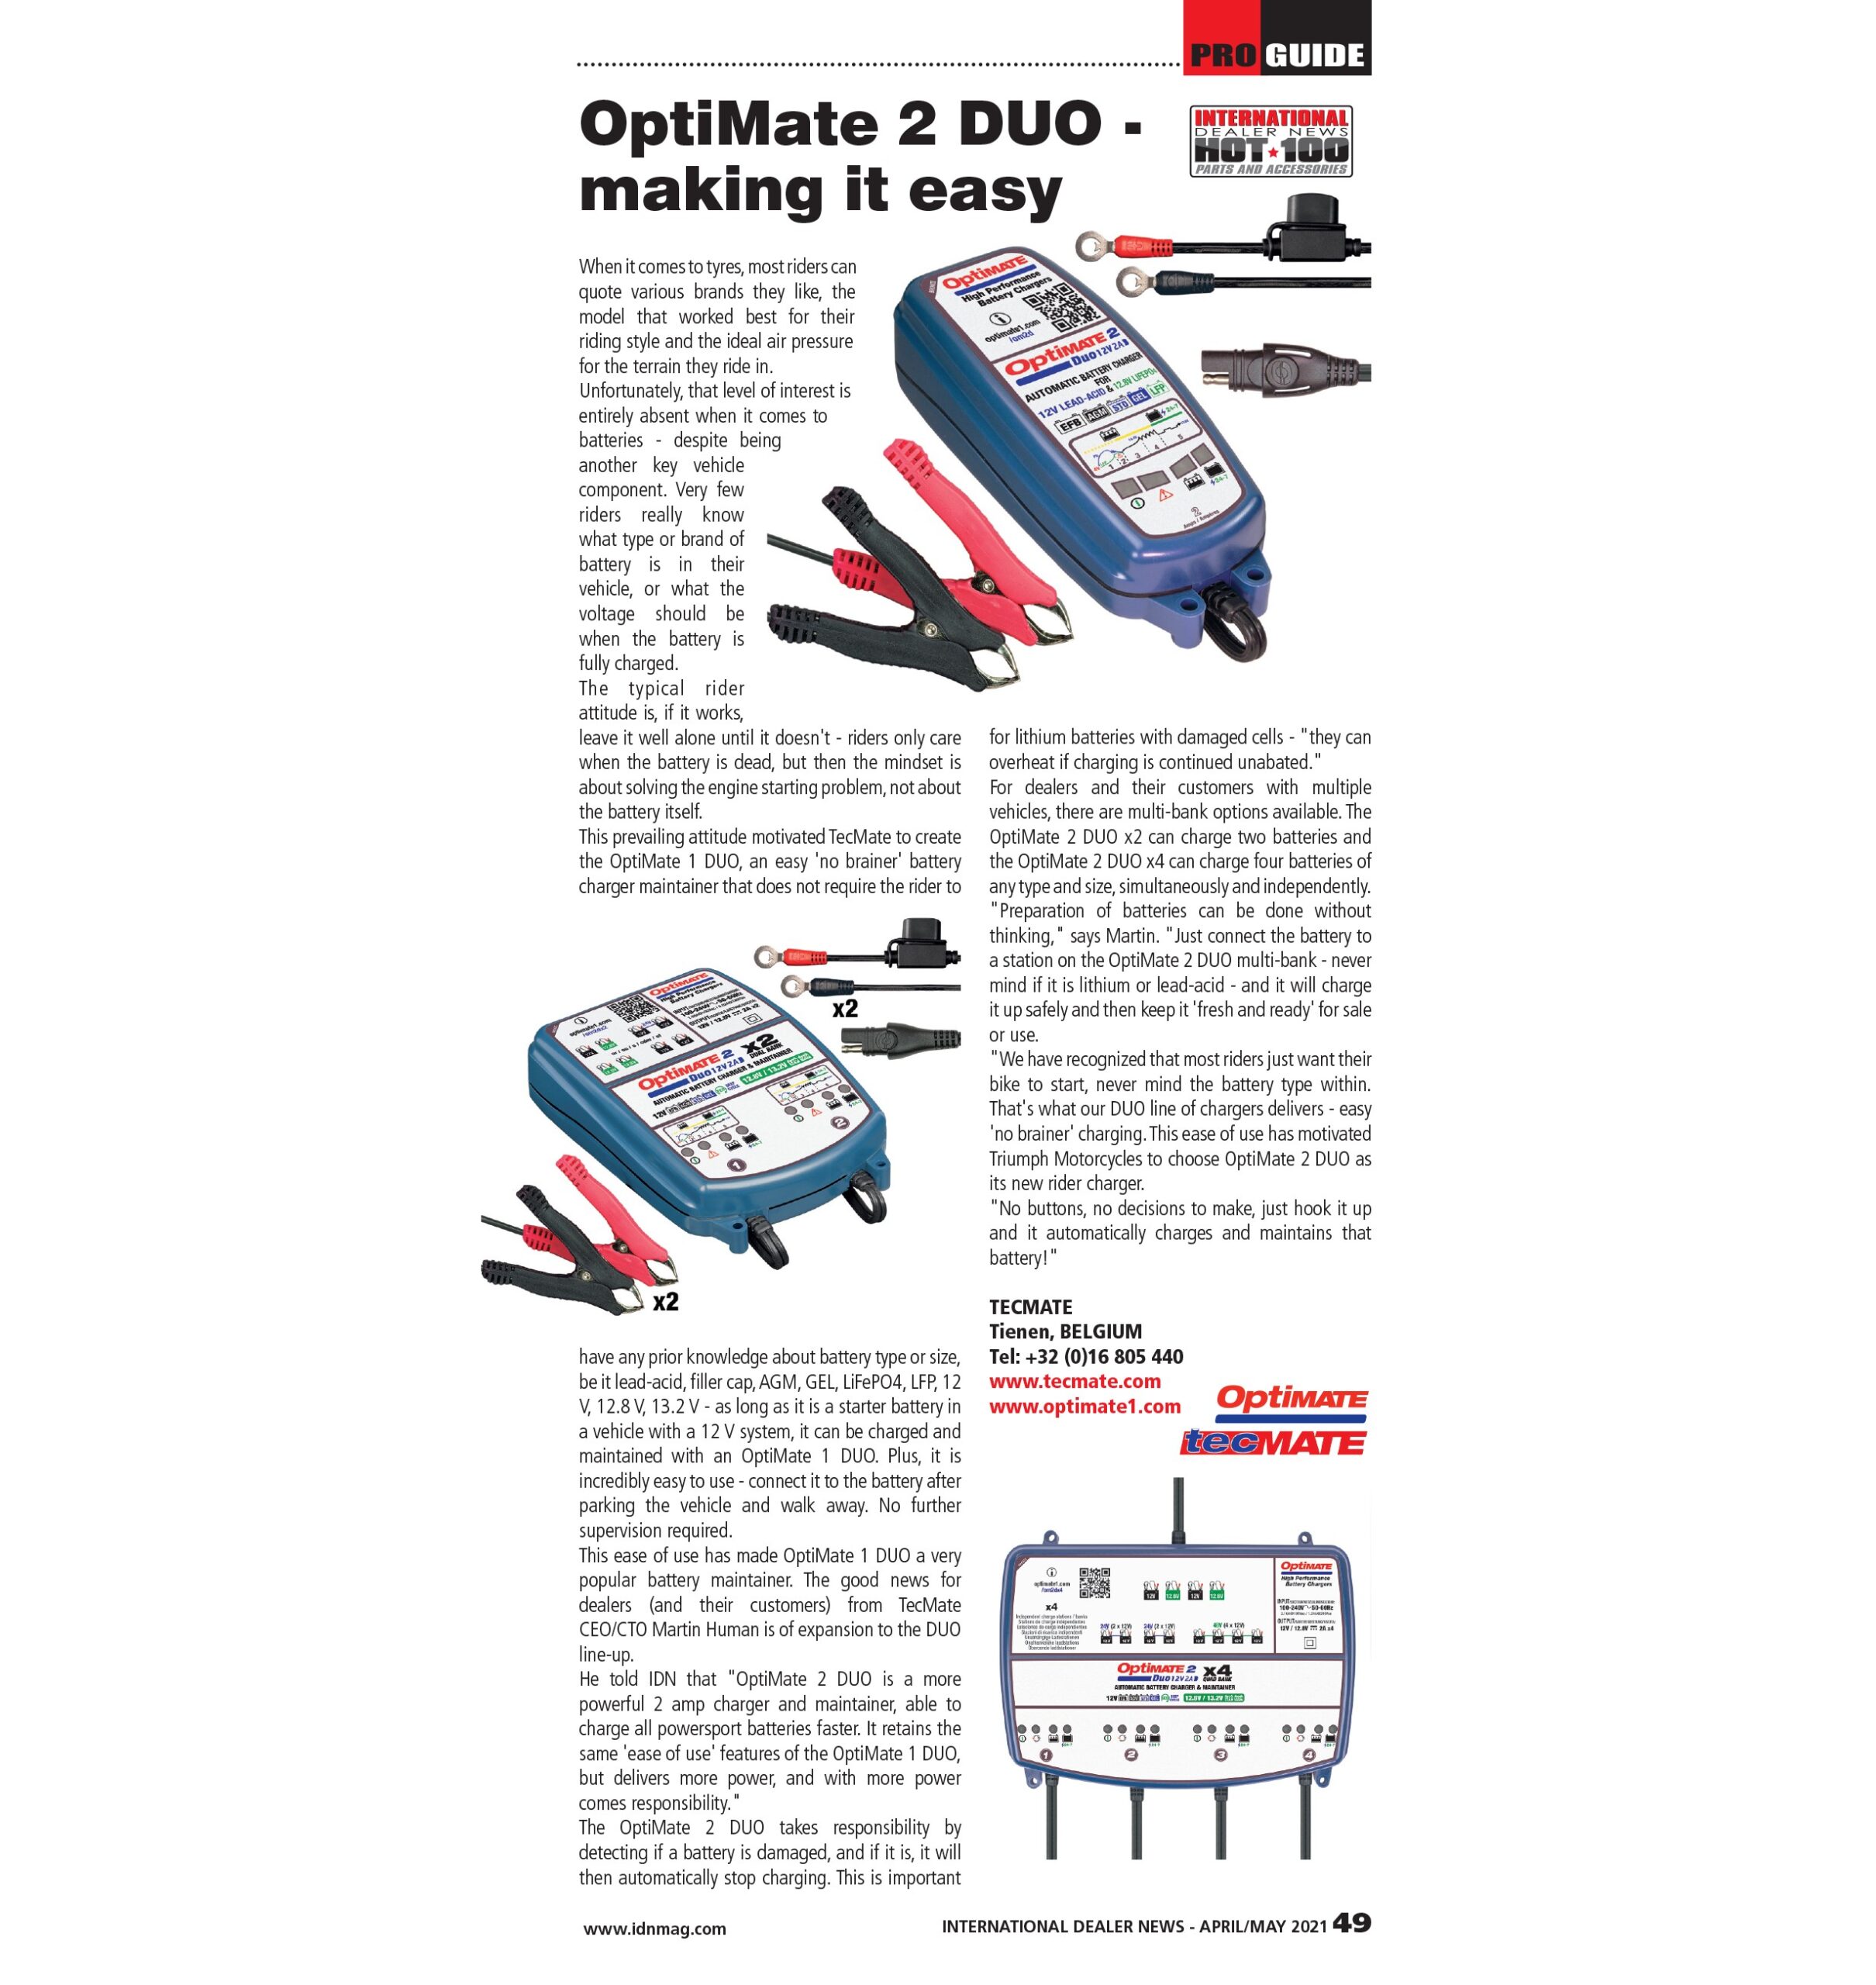 Article about the OptiMate 2 DUO battery charger